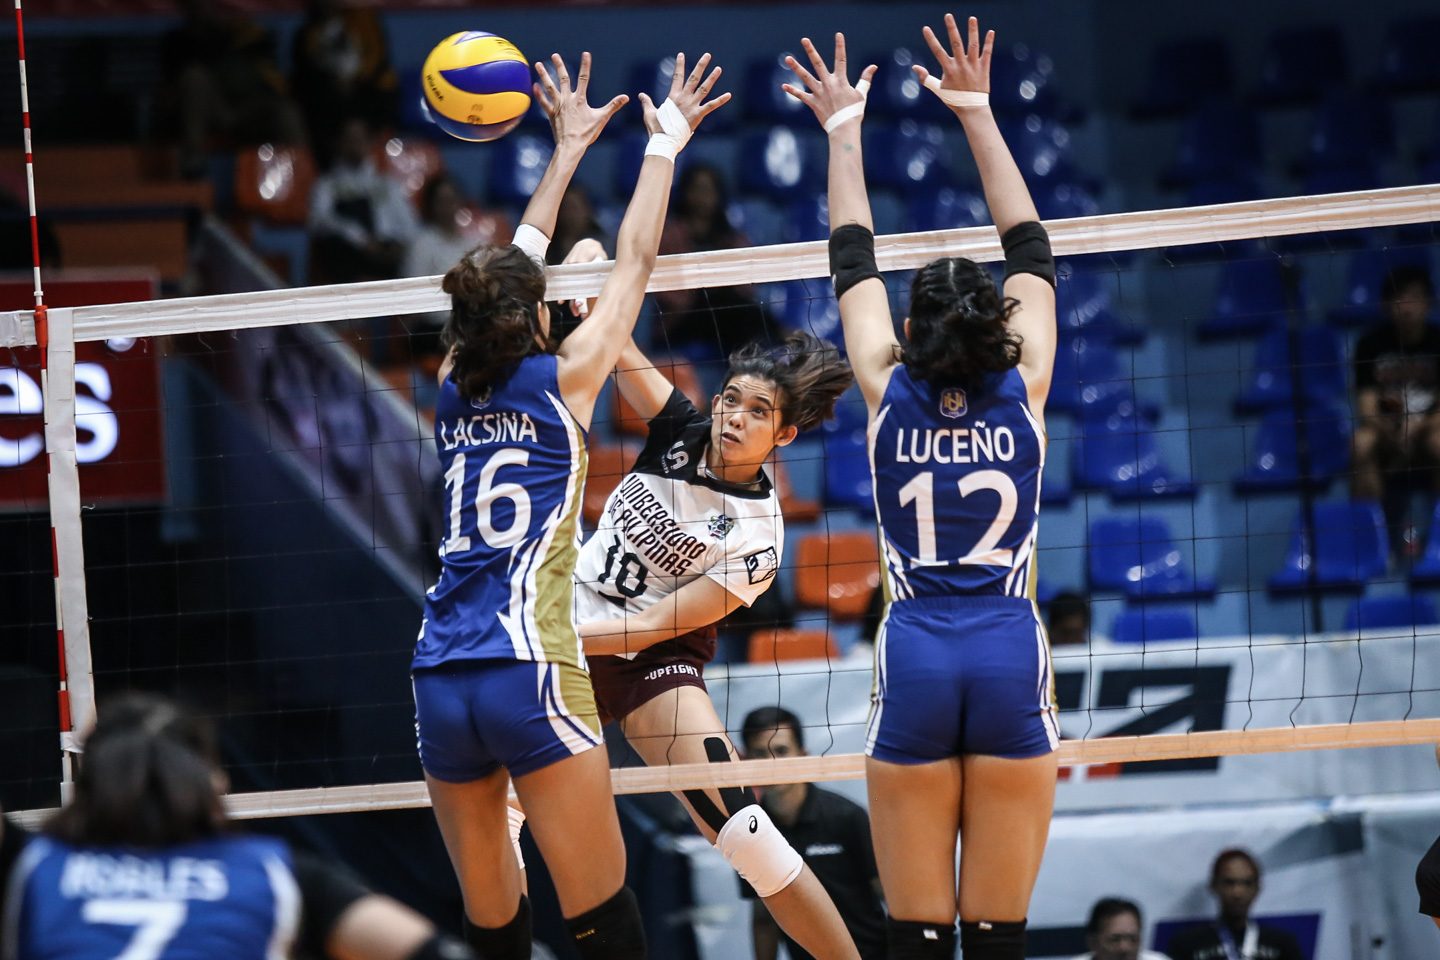 UP, Adamson go for bounce-back win as UST eyes share of 2nd